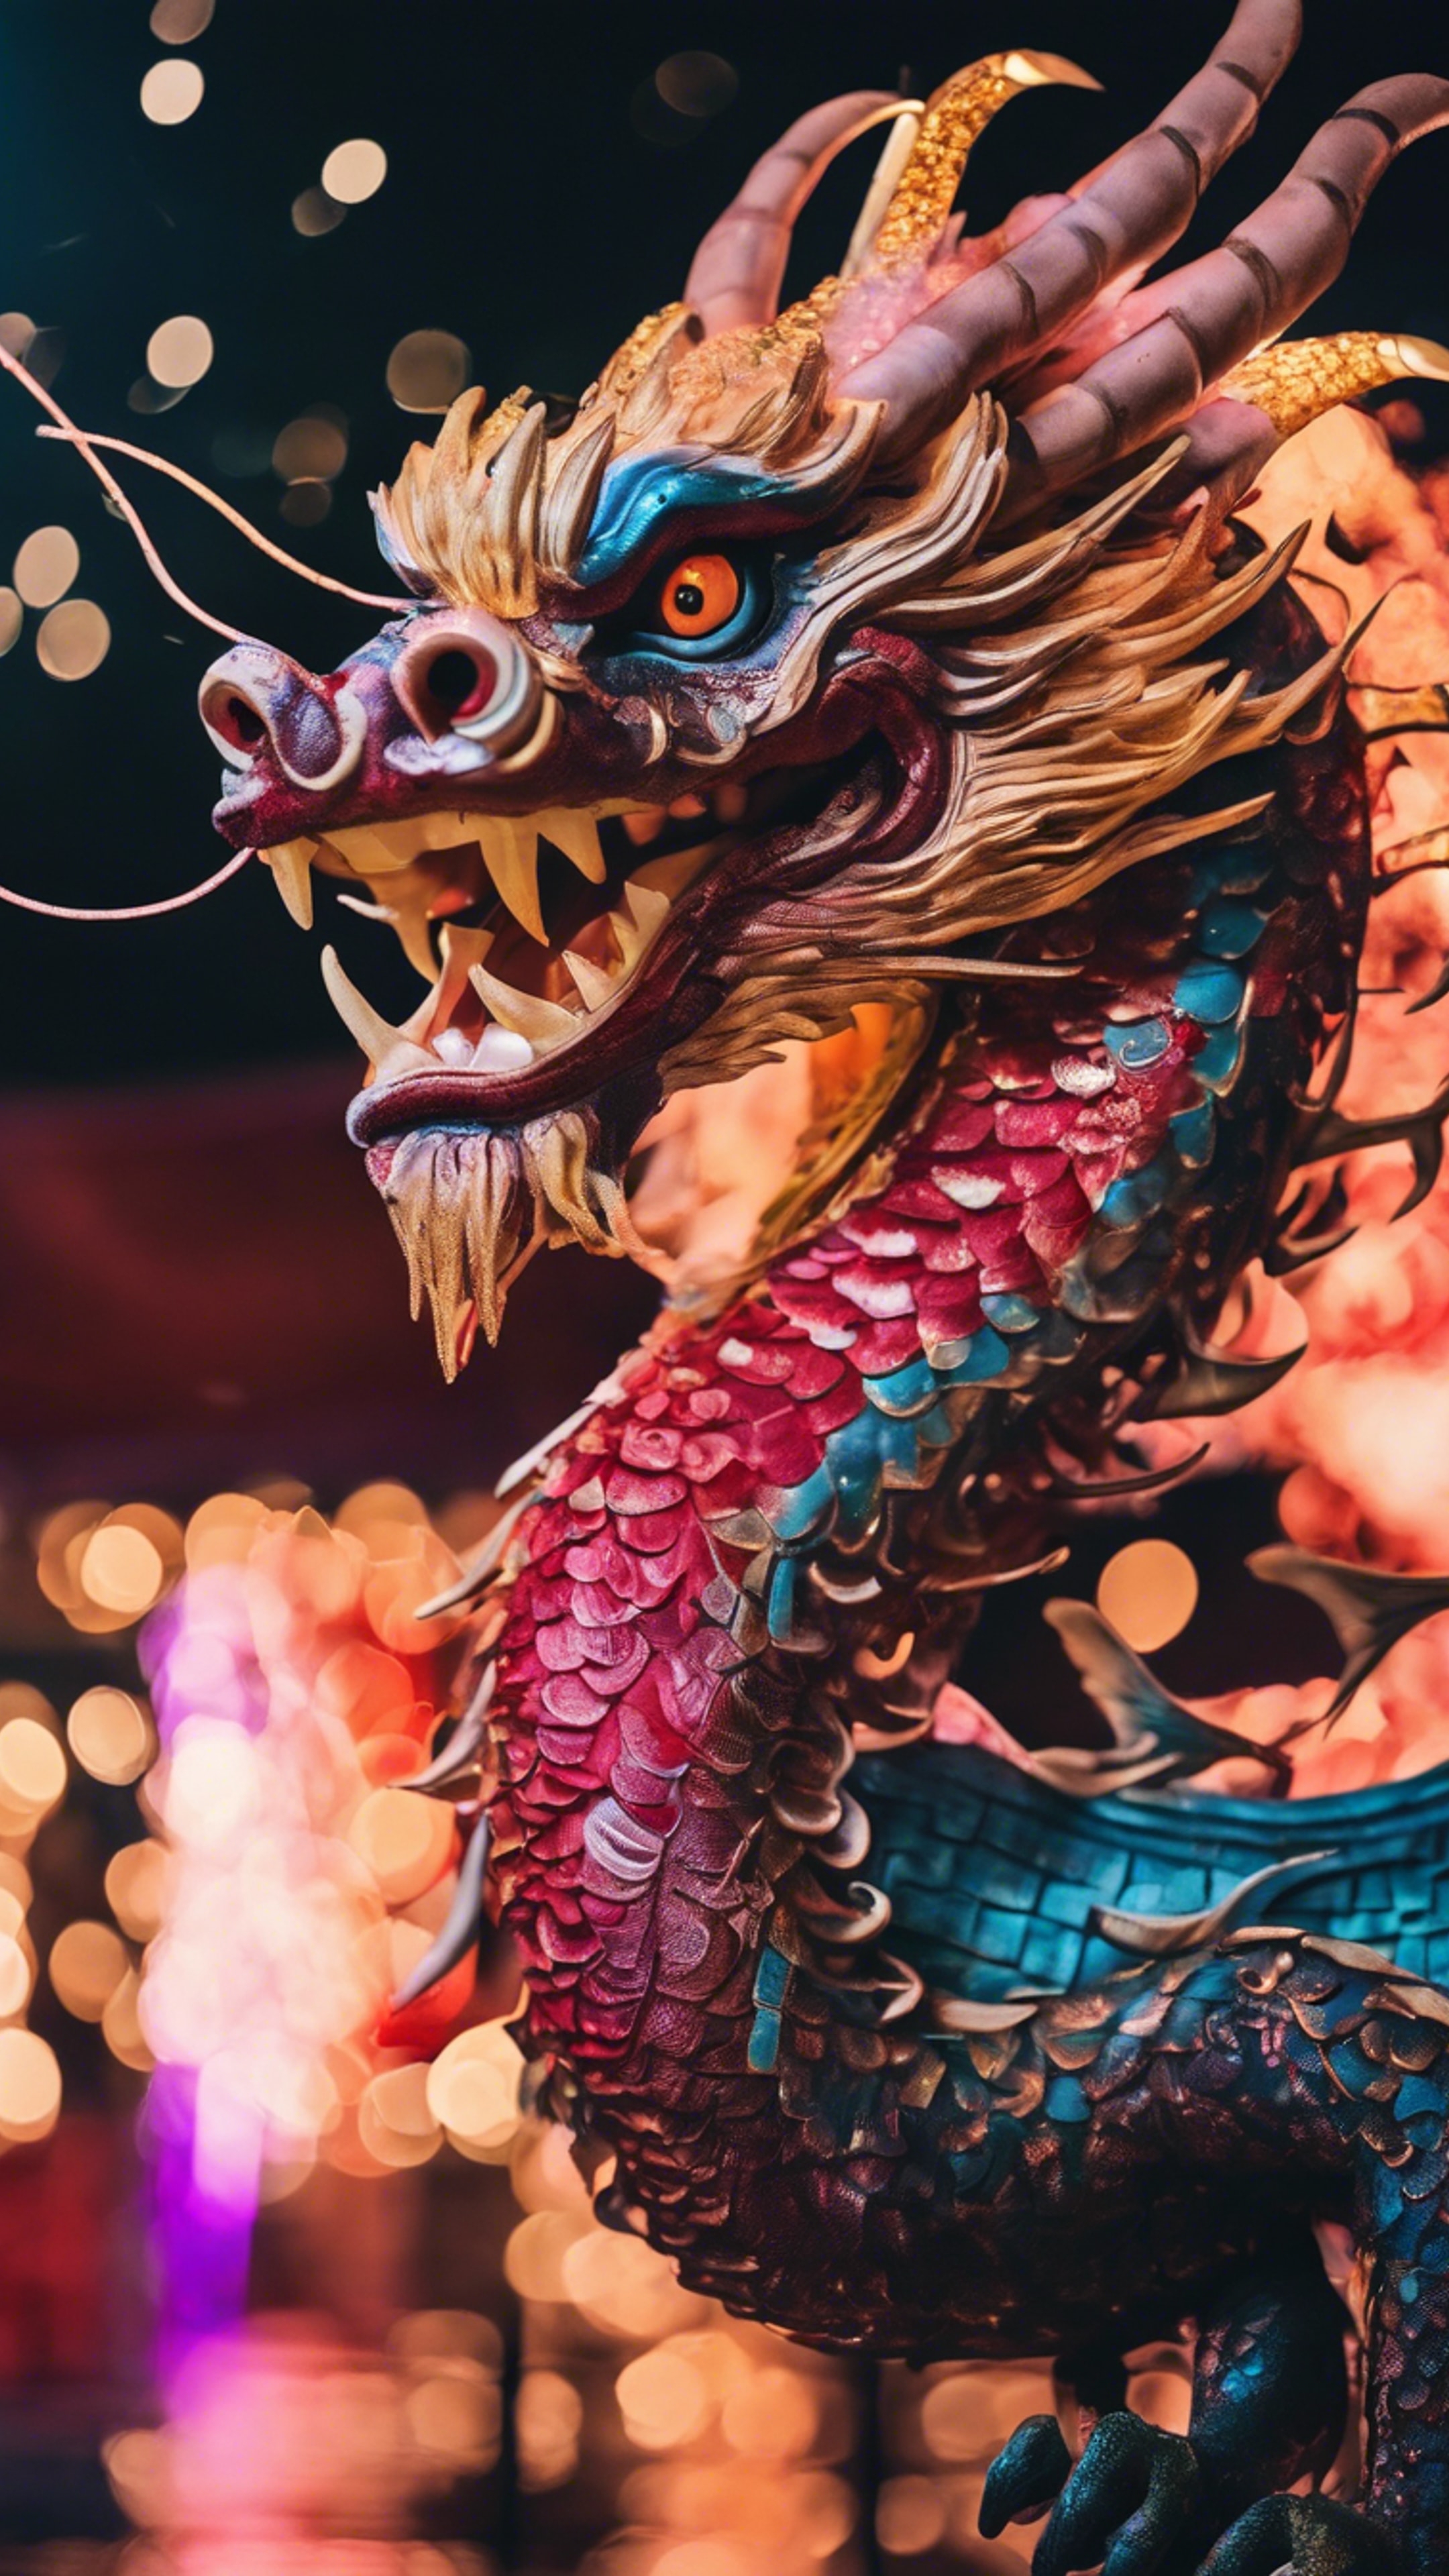 A vibrant Japanese dragon projected against the fireworks during summer festival.壁紙[b2884306885449d69931]